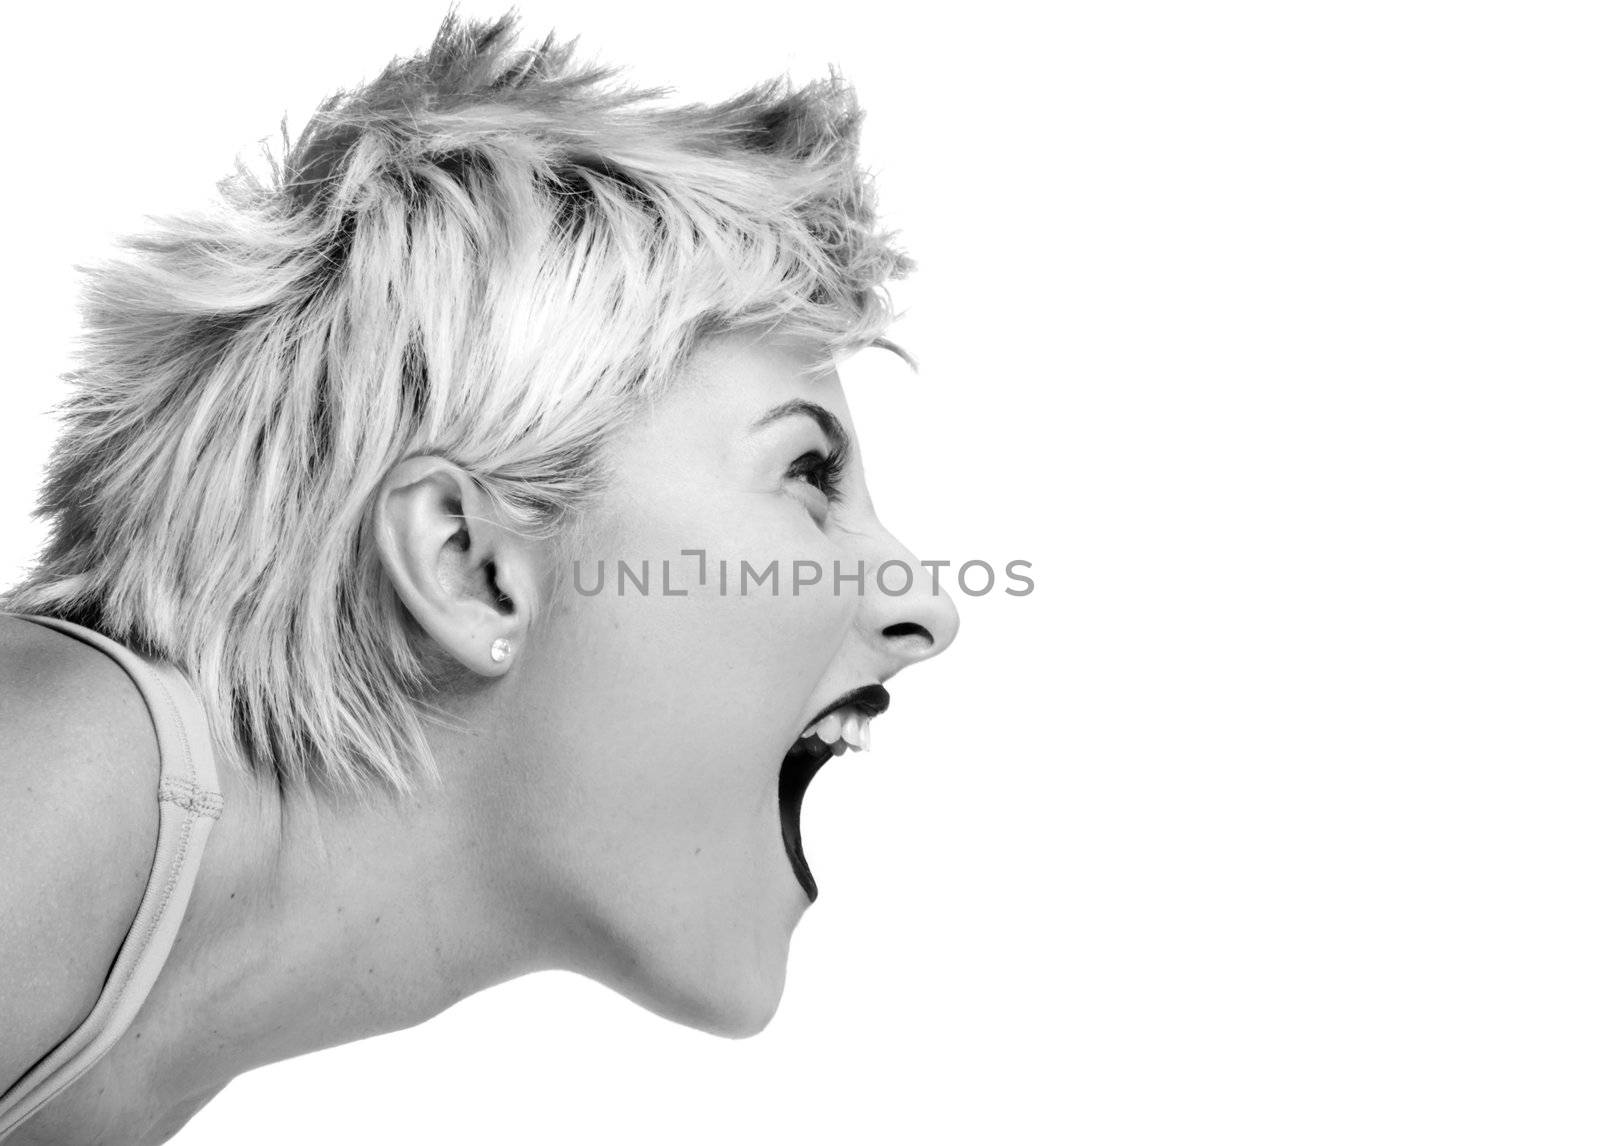 Punk Girl Shouting at the Microphone by HypnoCreative